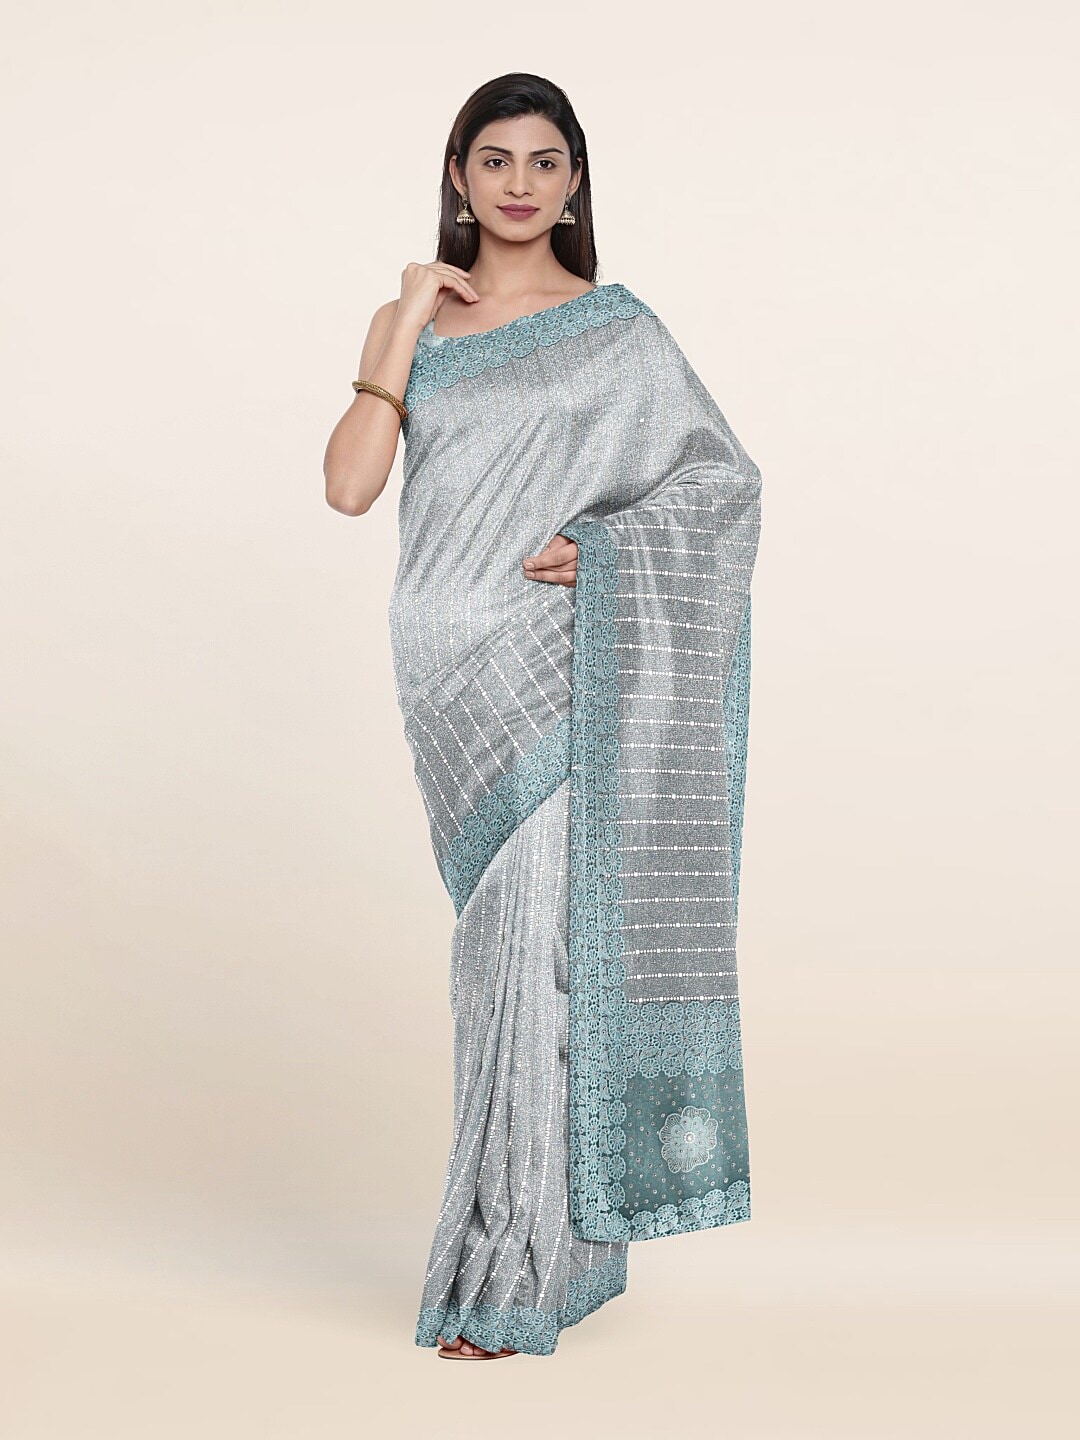 Pothys Blue & White Striped Beads and Stones Saree Price in India